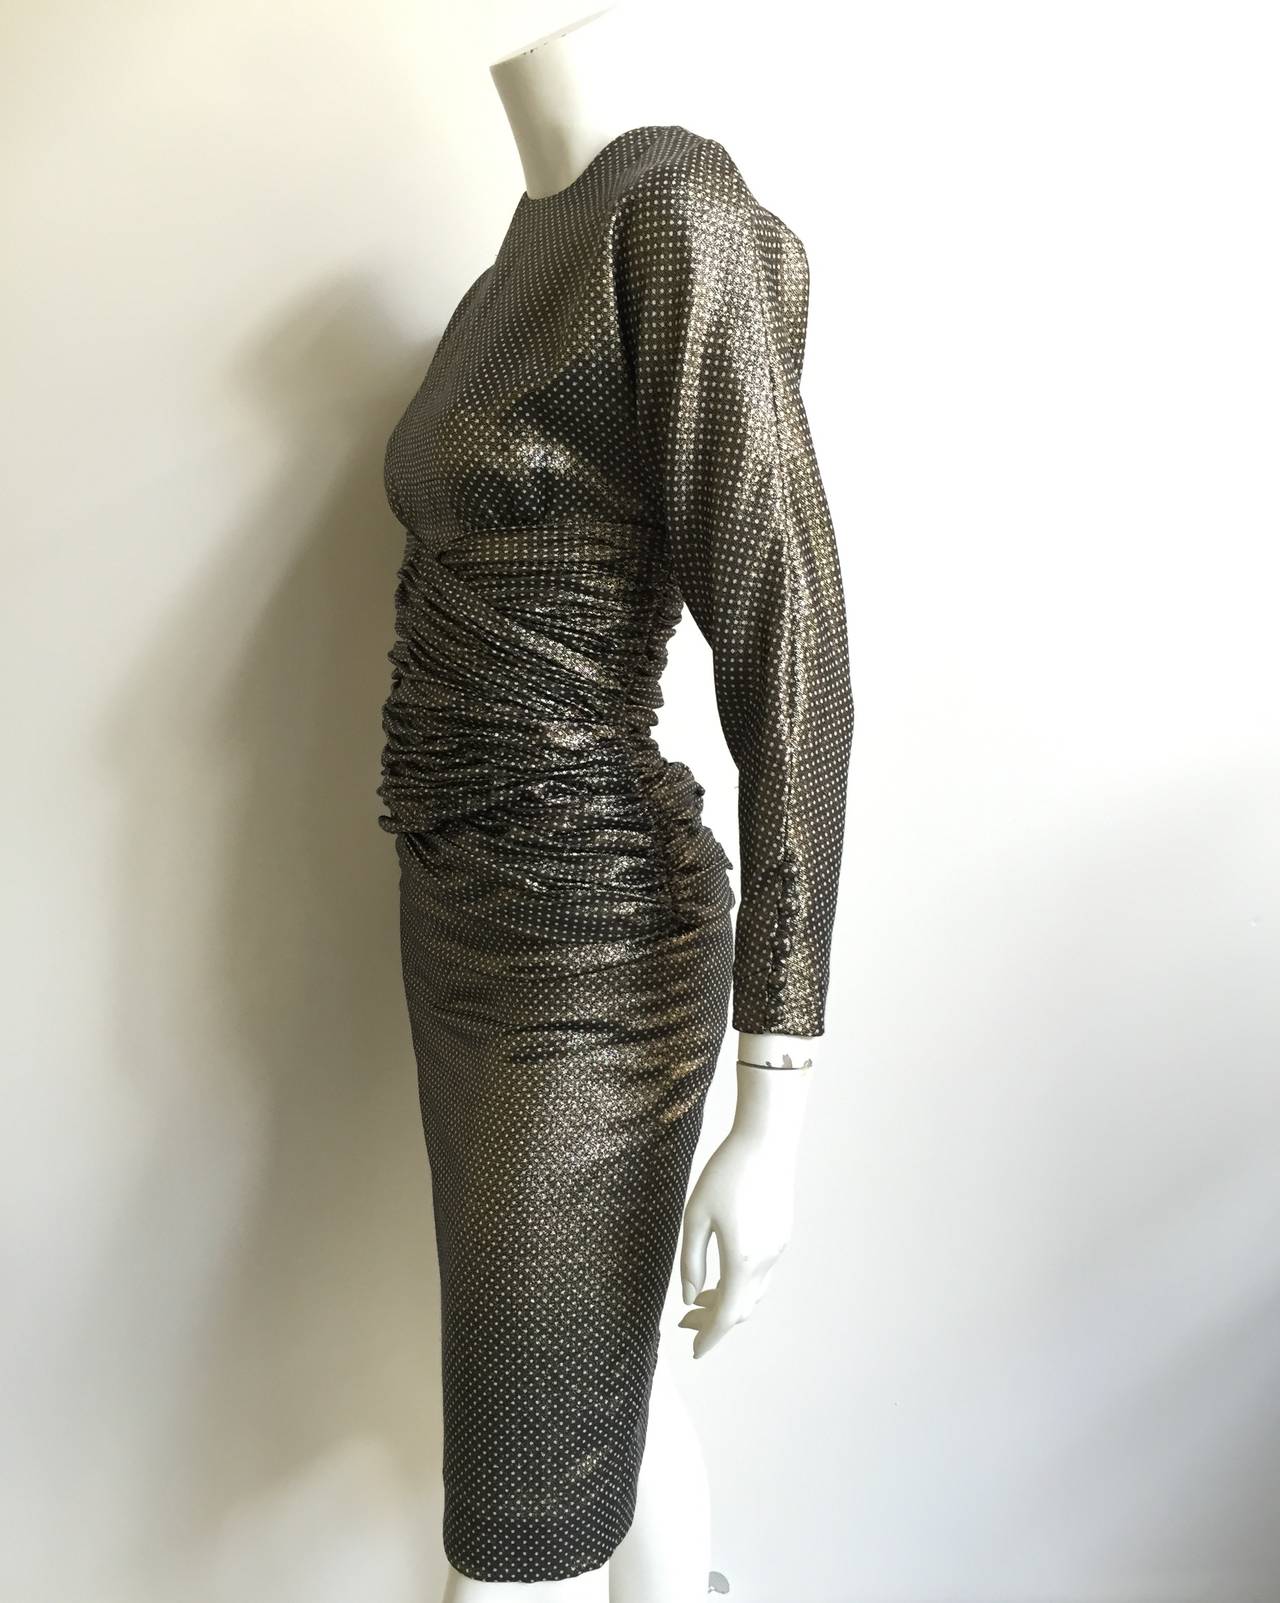 Carolyne Roehm 80s Evening Cocktail Dress Size 4. at 1stdibs